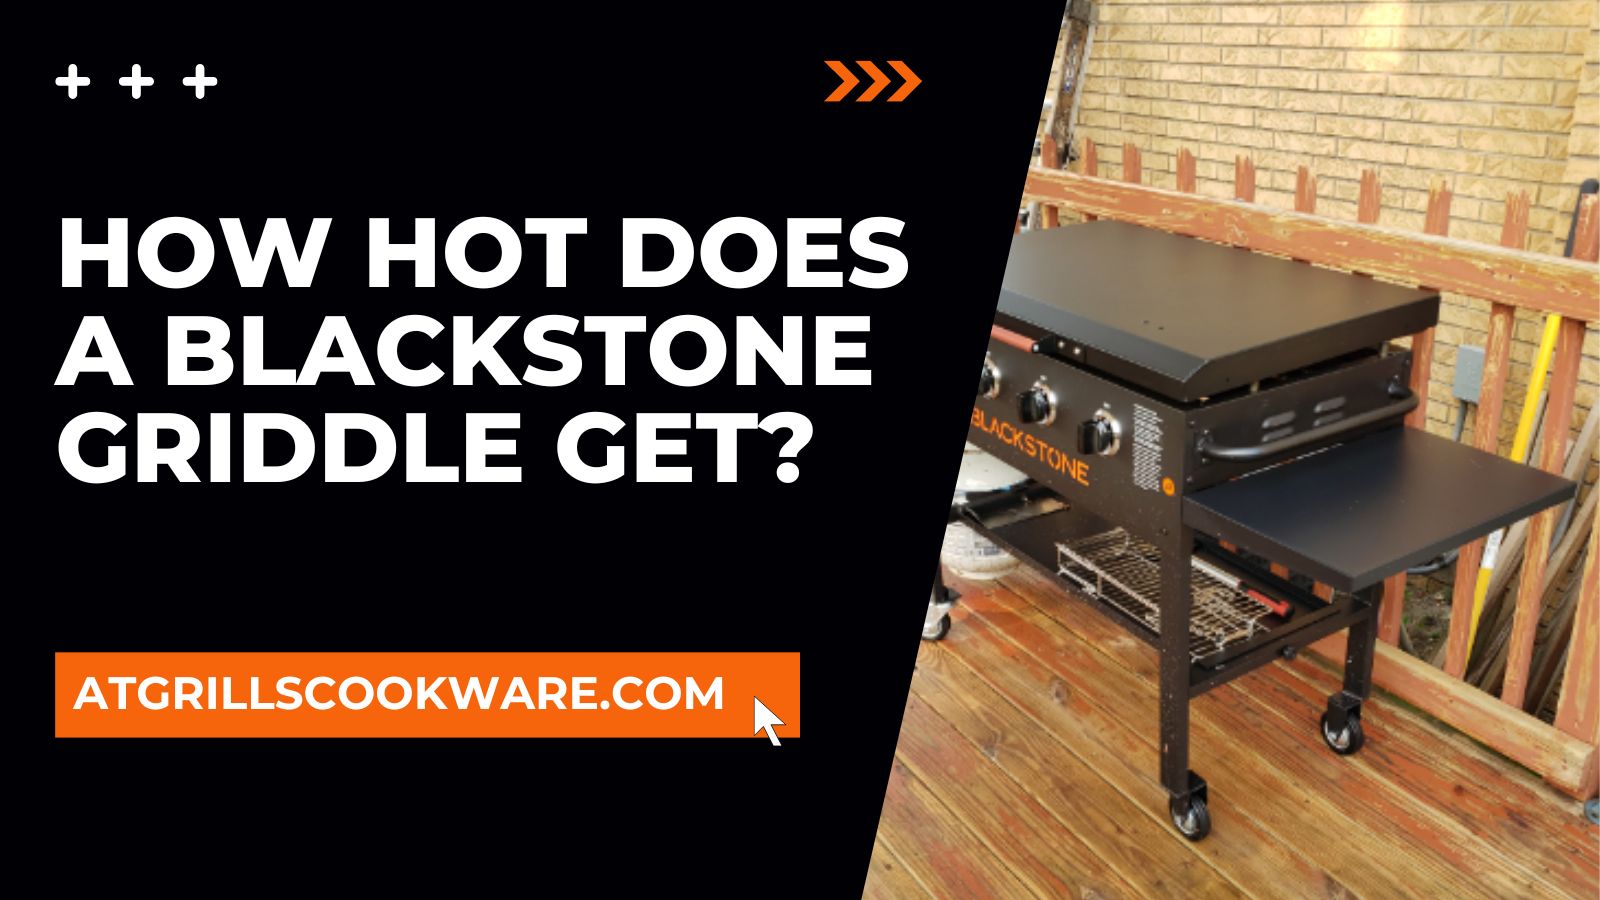 How Hot Does A Blackstone Griddle Get